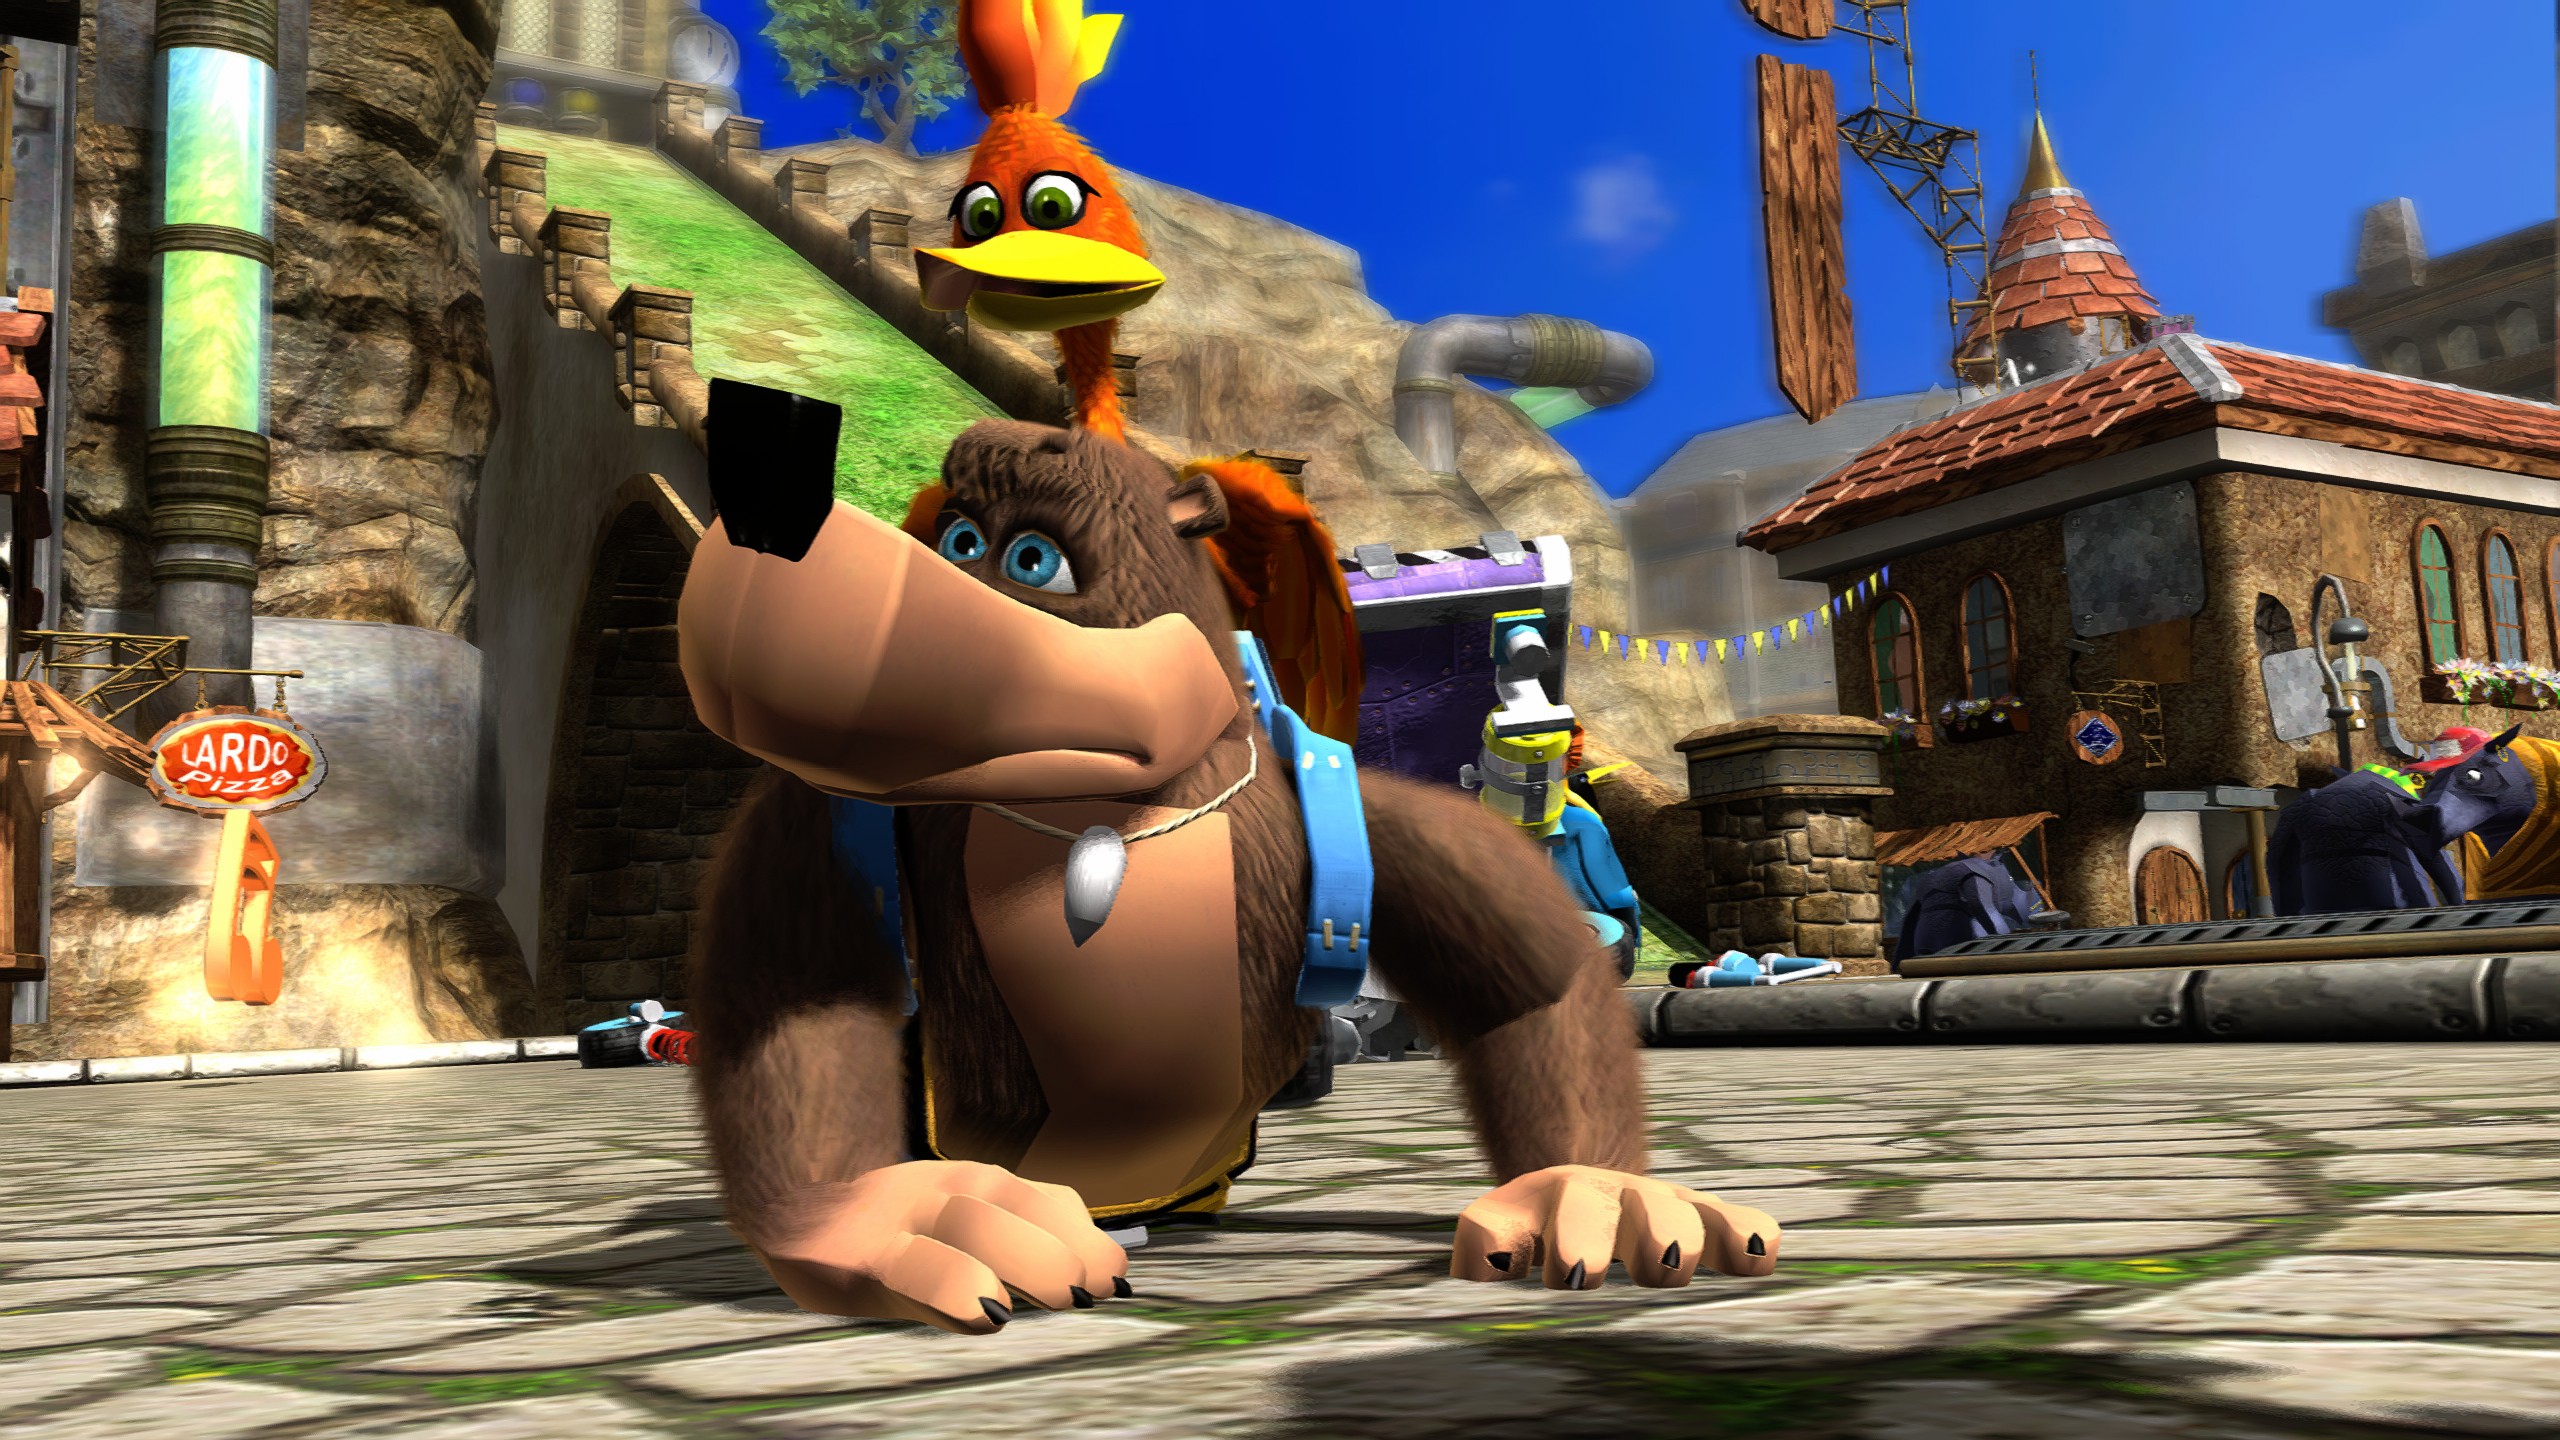 Banjo-Kazooie: Nuts & Bolts with 1x2 resolution scale, 2x MSAA, extreme quality FXAA, 1280x1440 upscaled to 2560x1440 by FSR